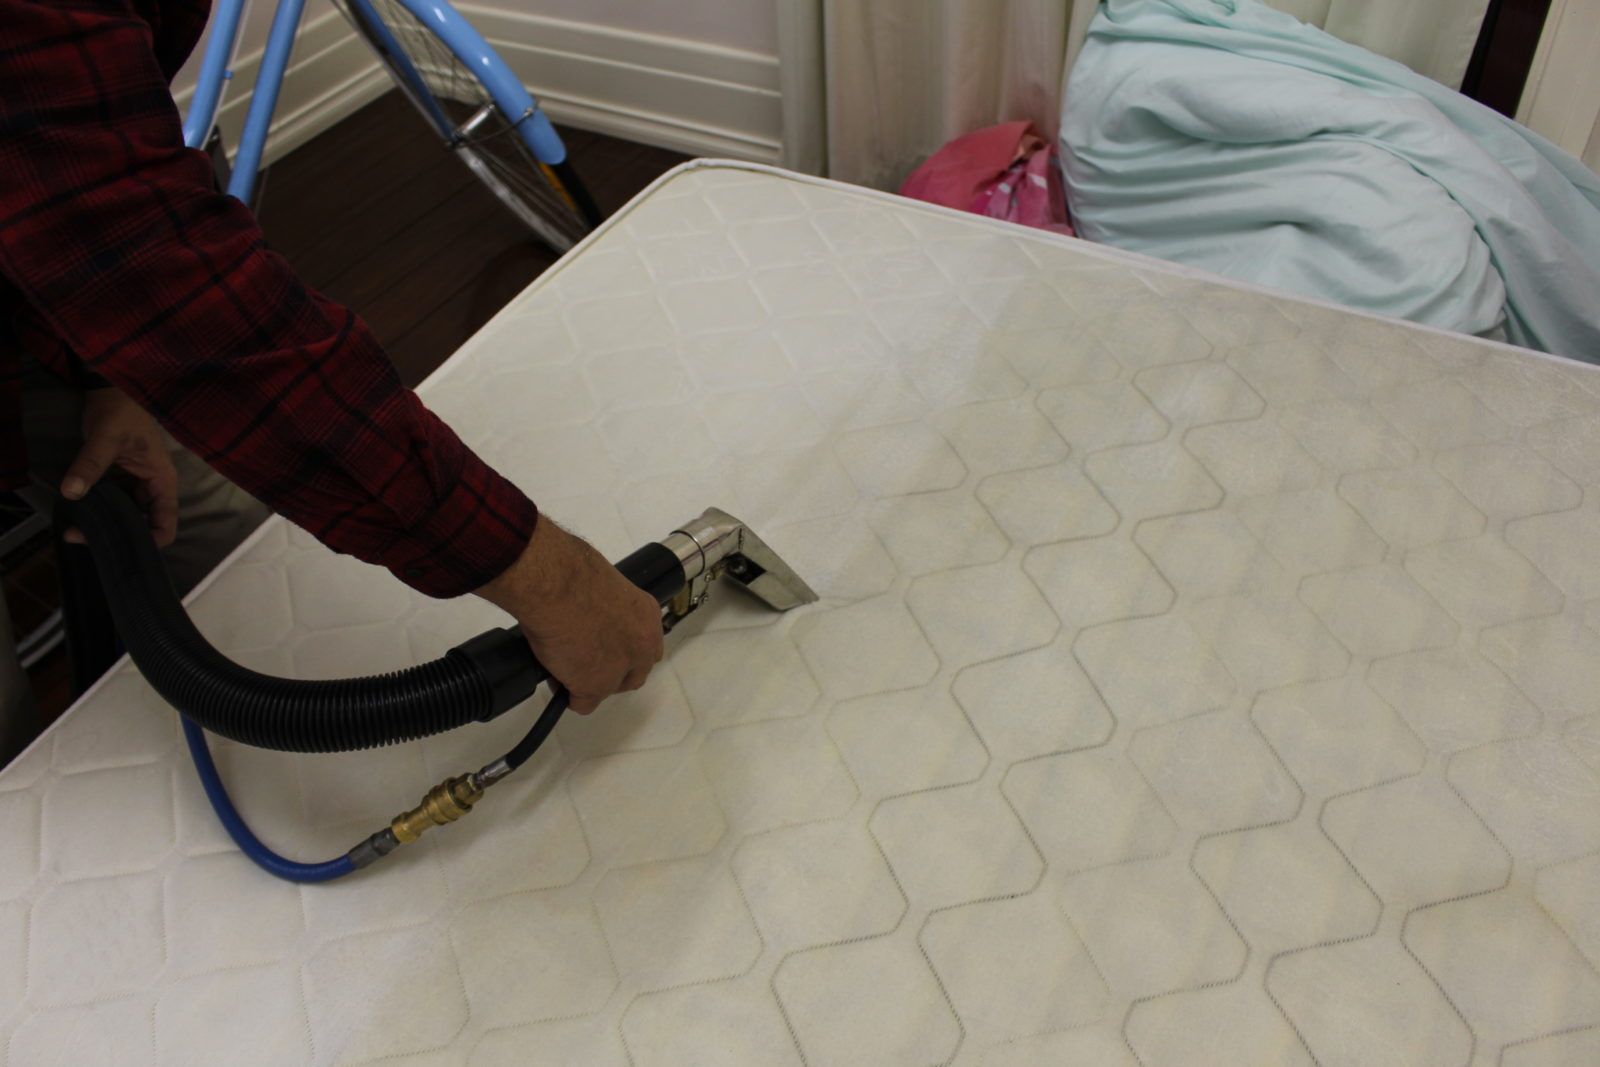 A person using a vacuum cleaner to clean a mattress, effectively removing dust, dirt, and allergens.